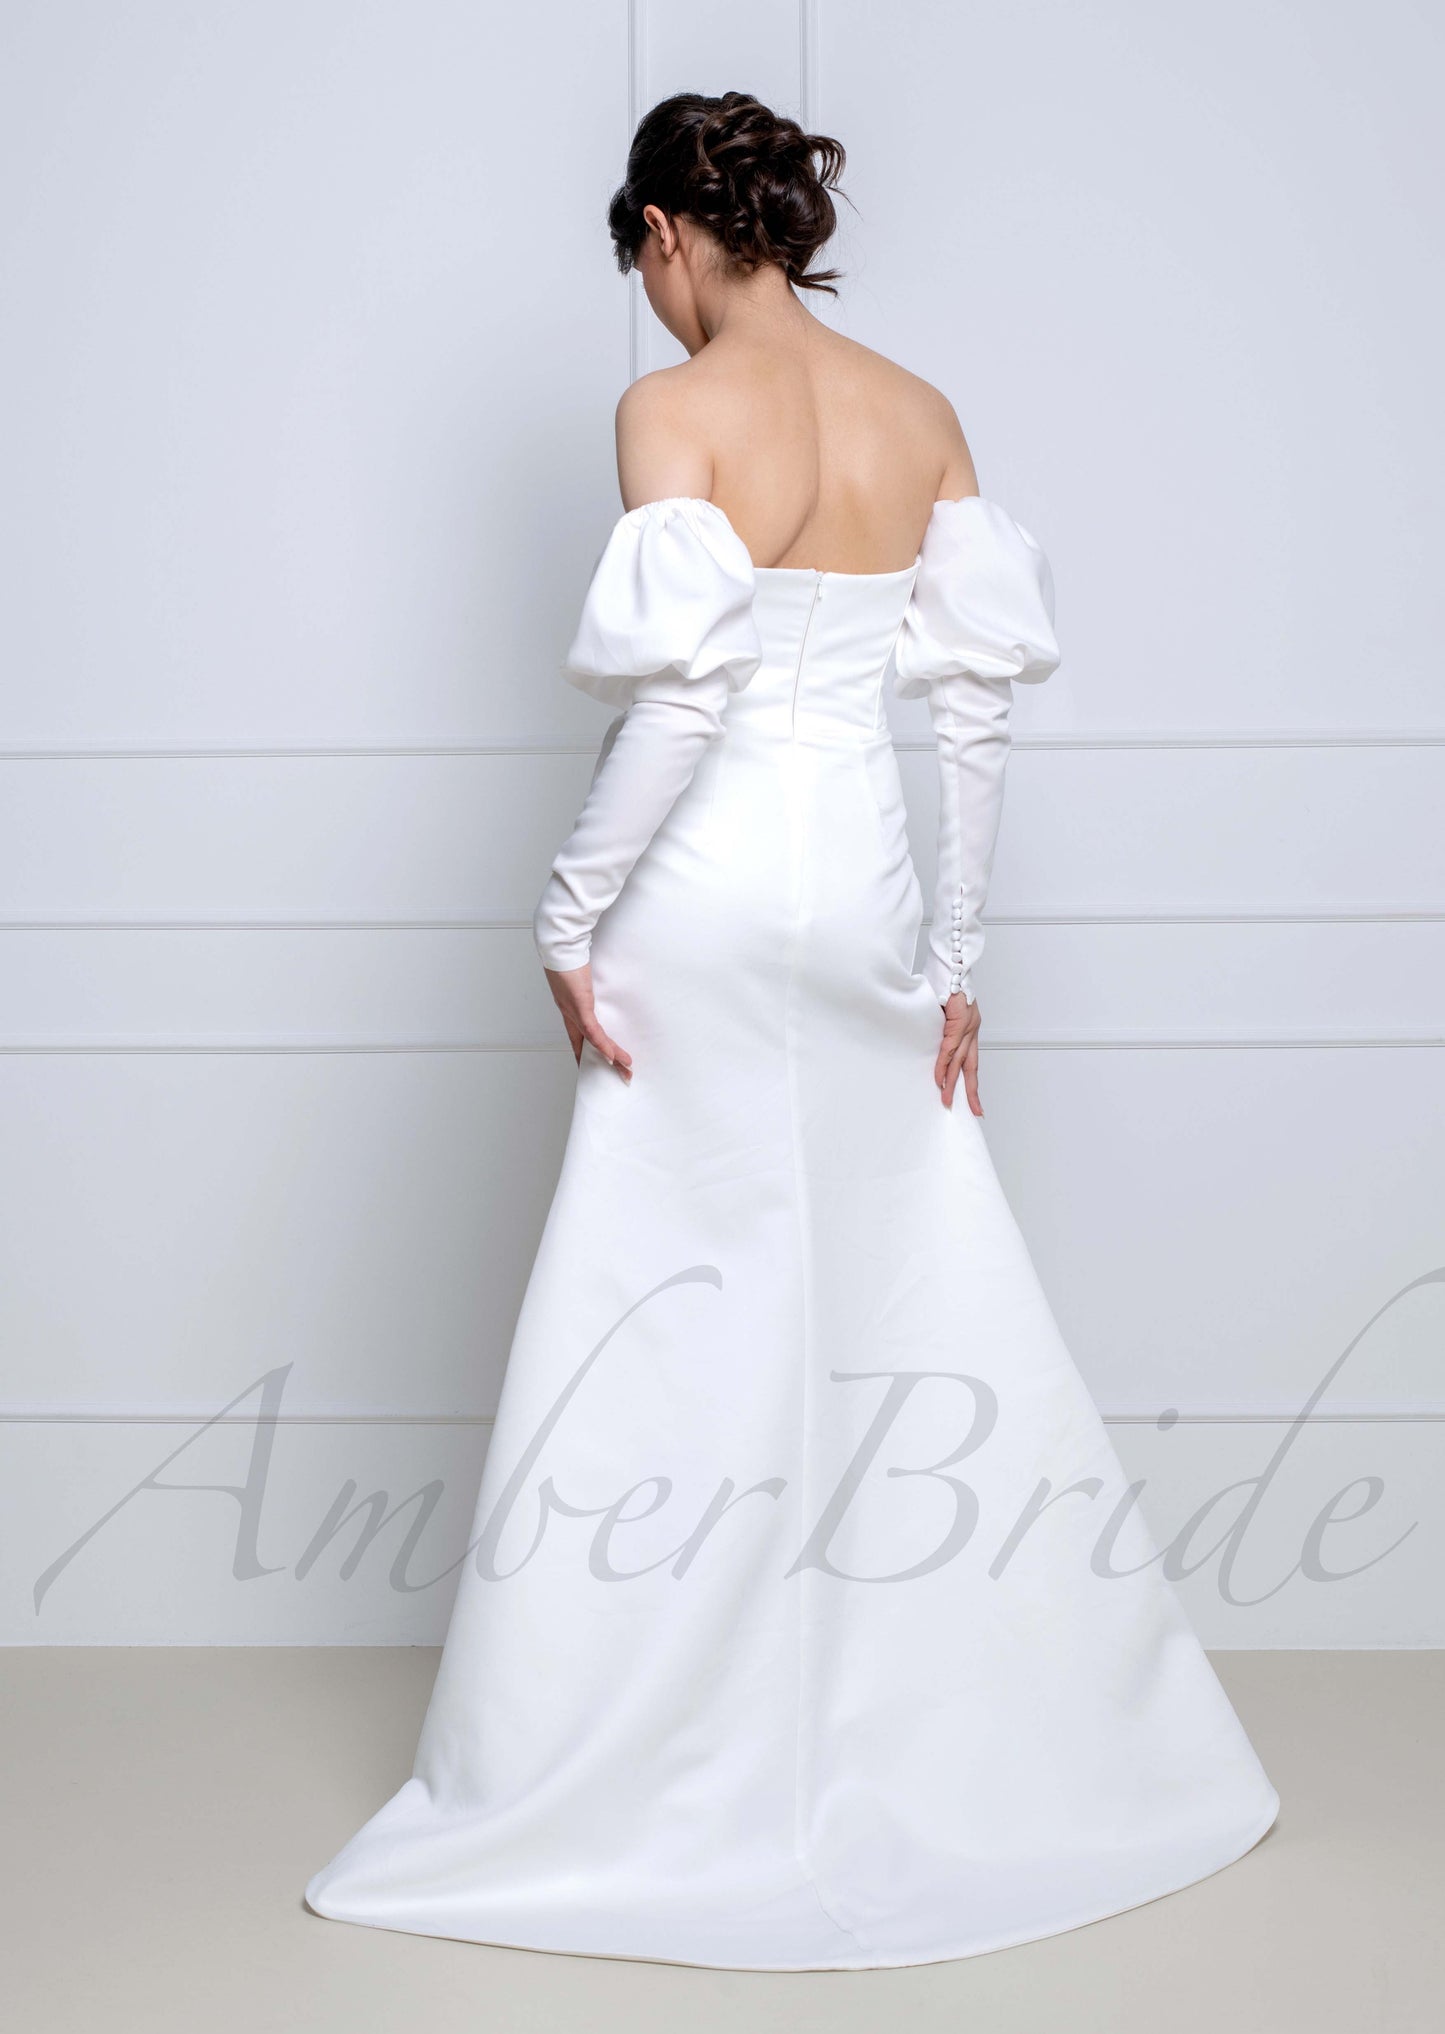 STOCK SELL-OUT: Exquisite Satin Wedding Dress with Overskirt